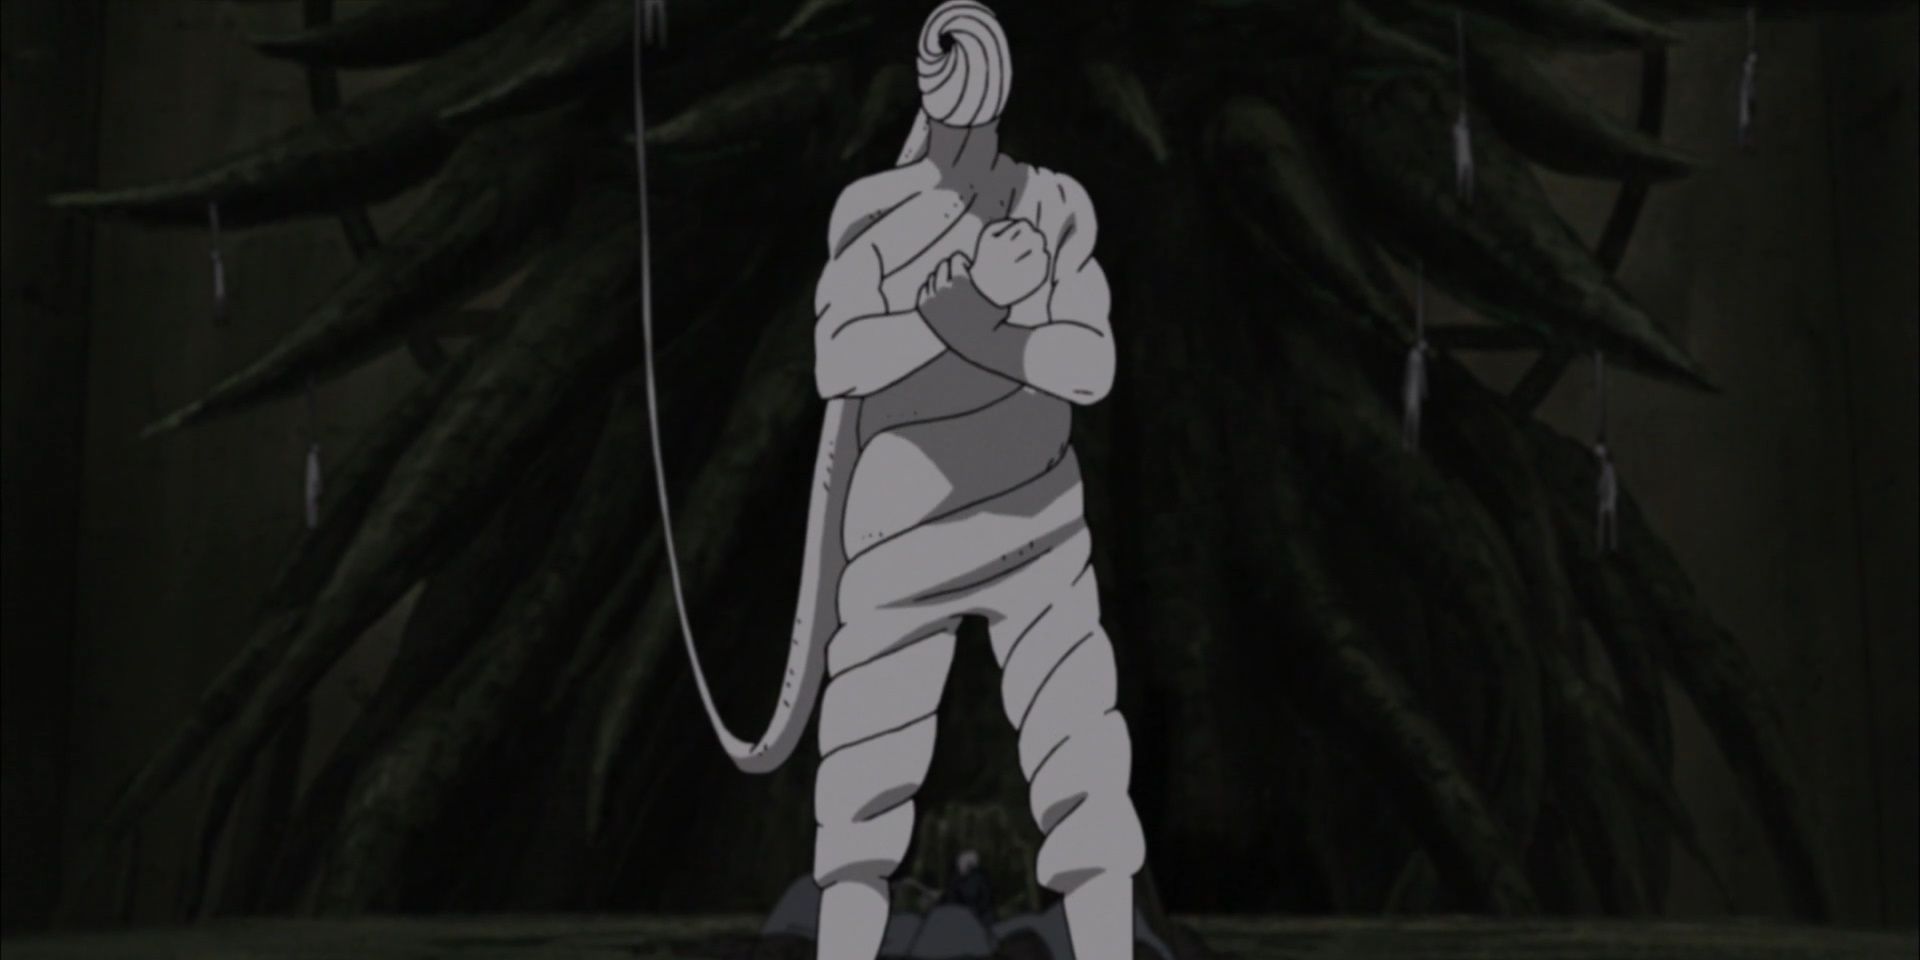 tobi from naruto standing with his arms folded